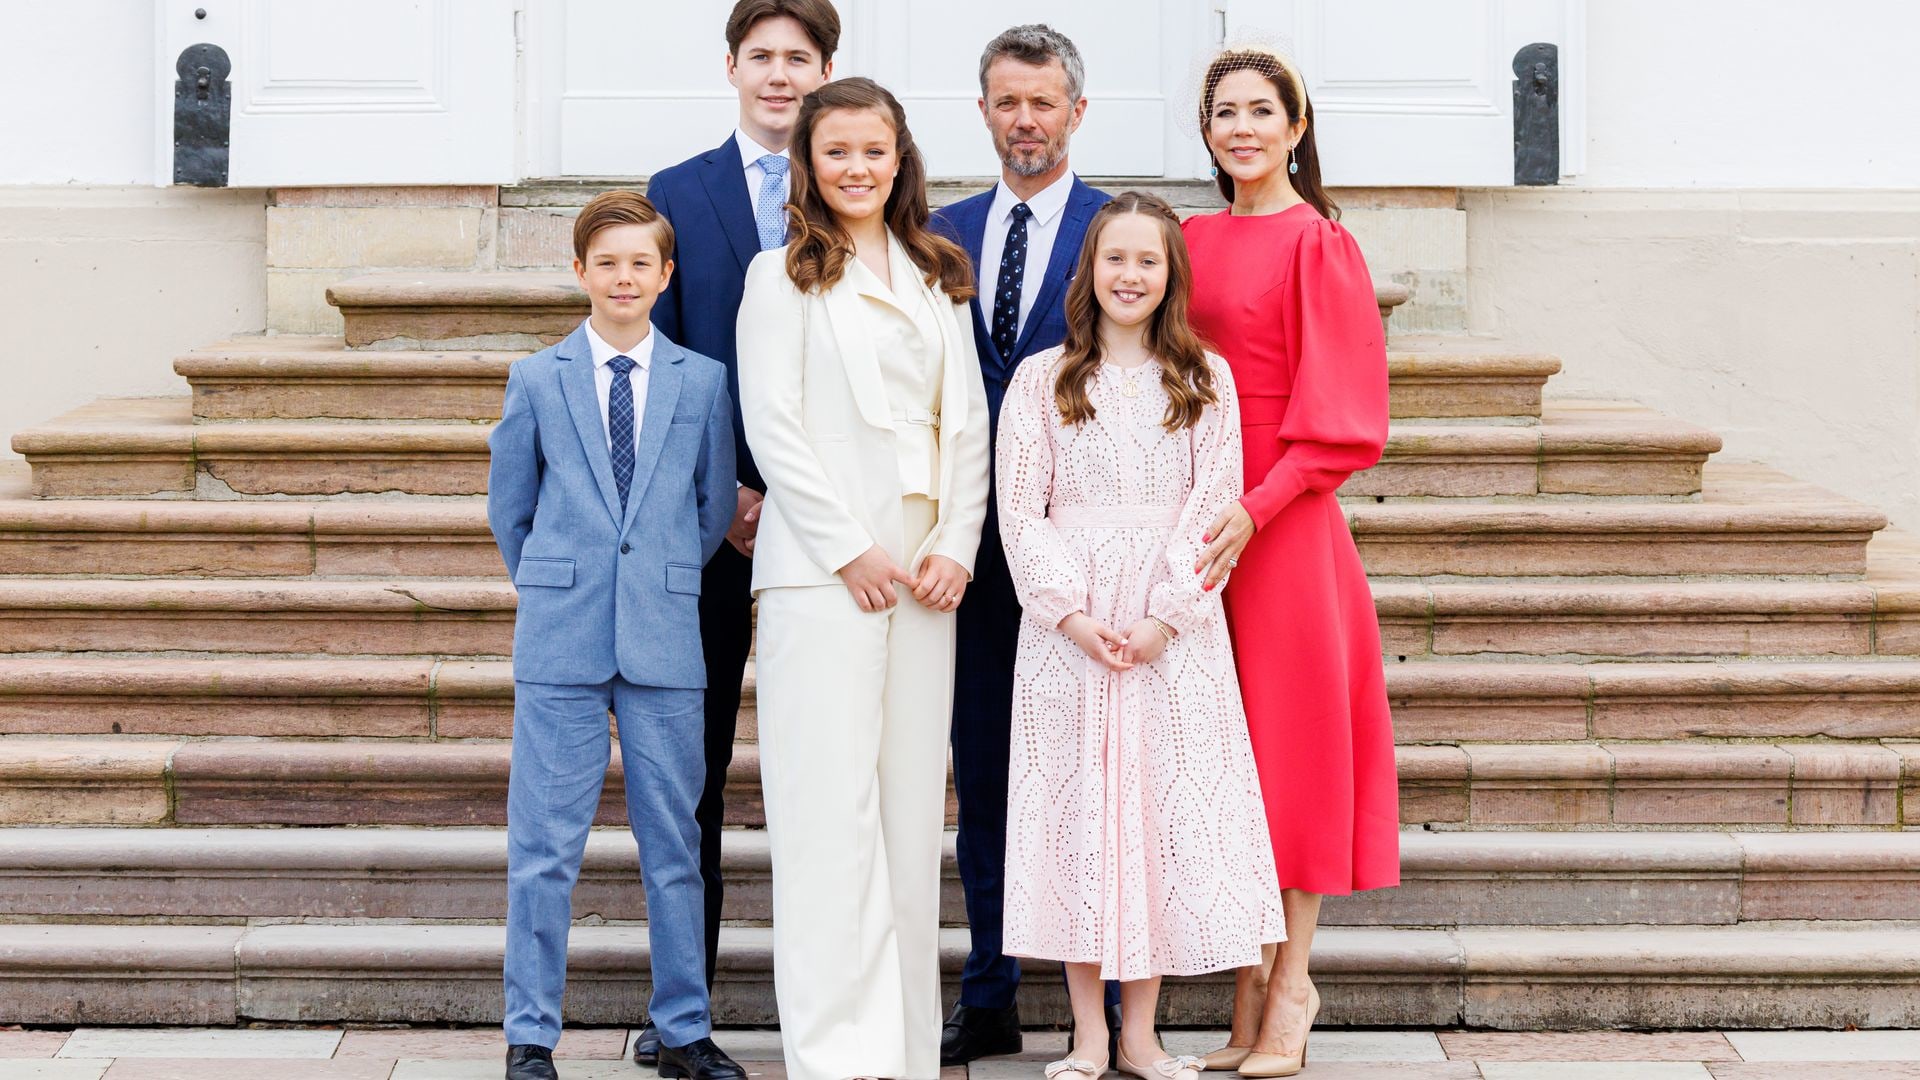 Crown Prince Frederik and Crown Princess Mary and their four children